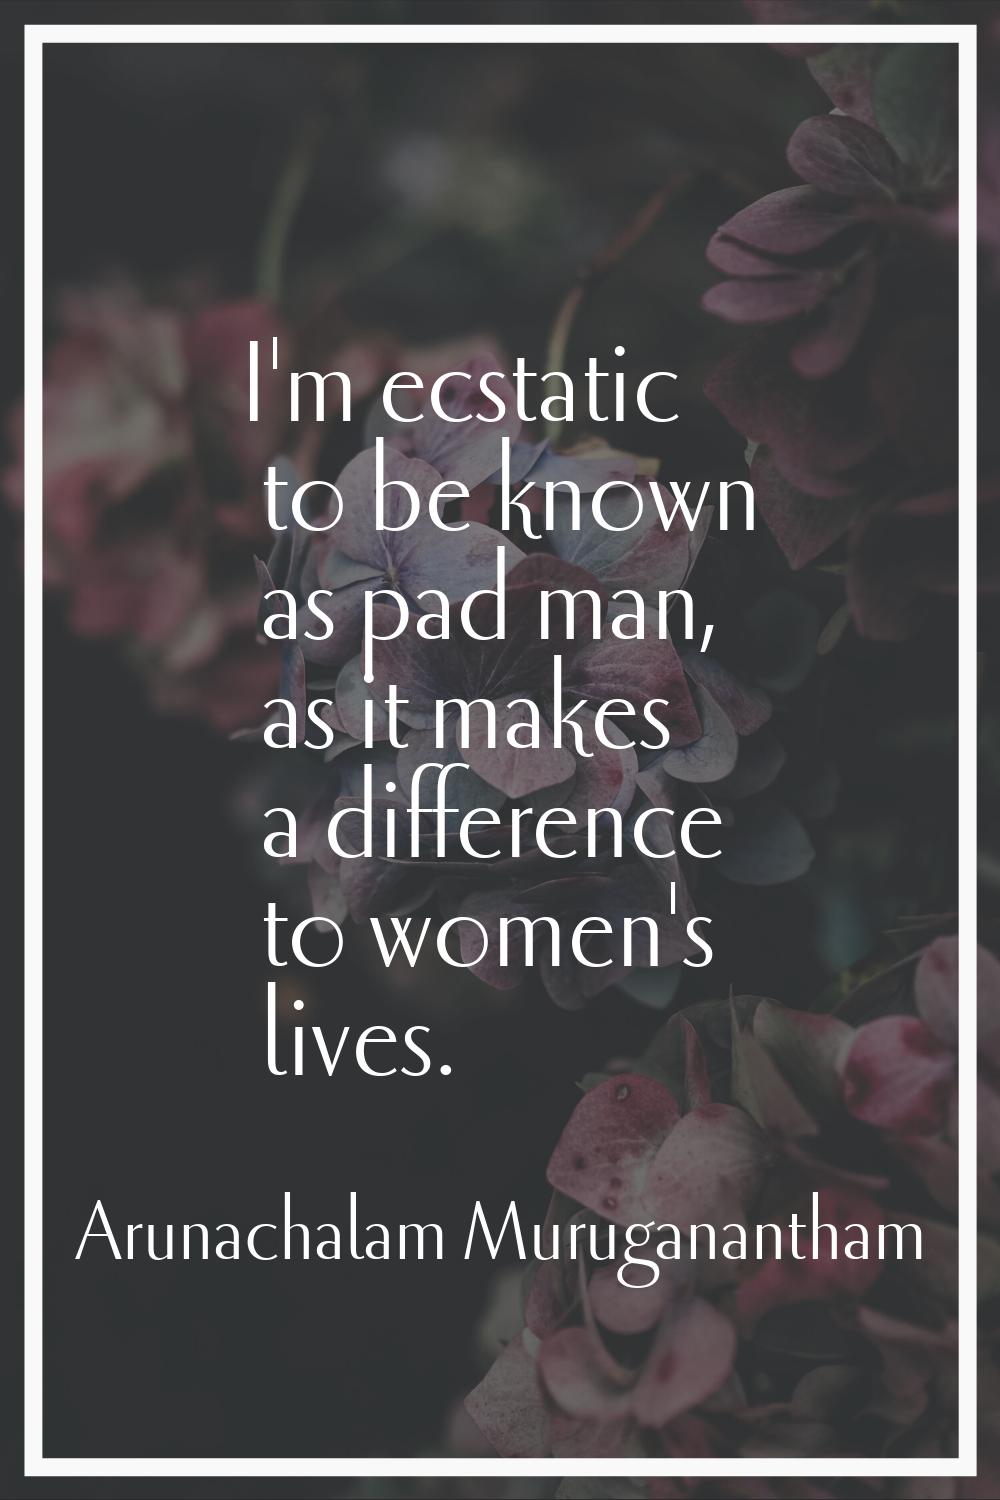 I'm ecstatic to be known as pad man, as it makes a difference to women's lives.